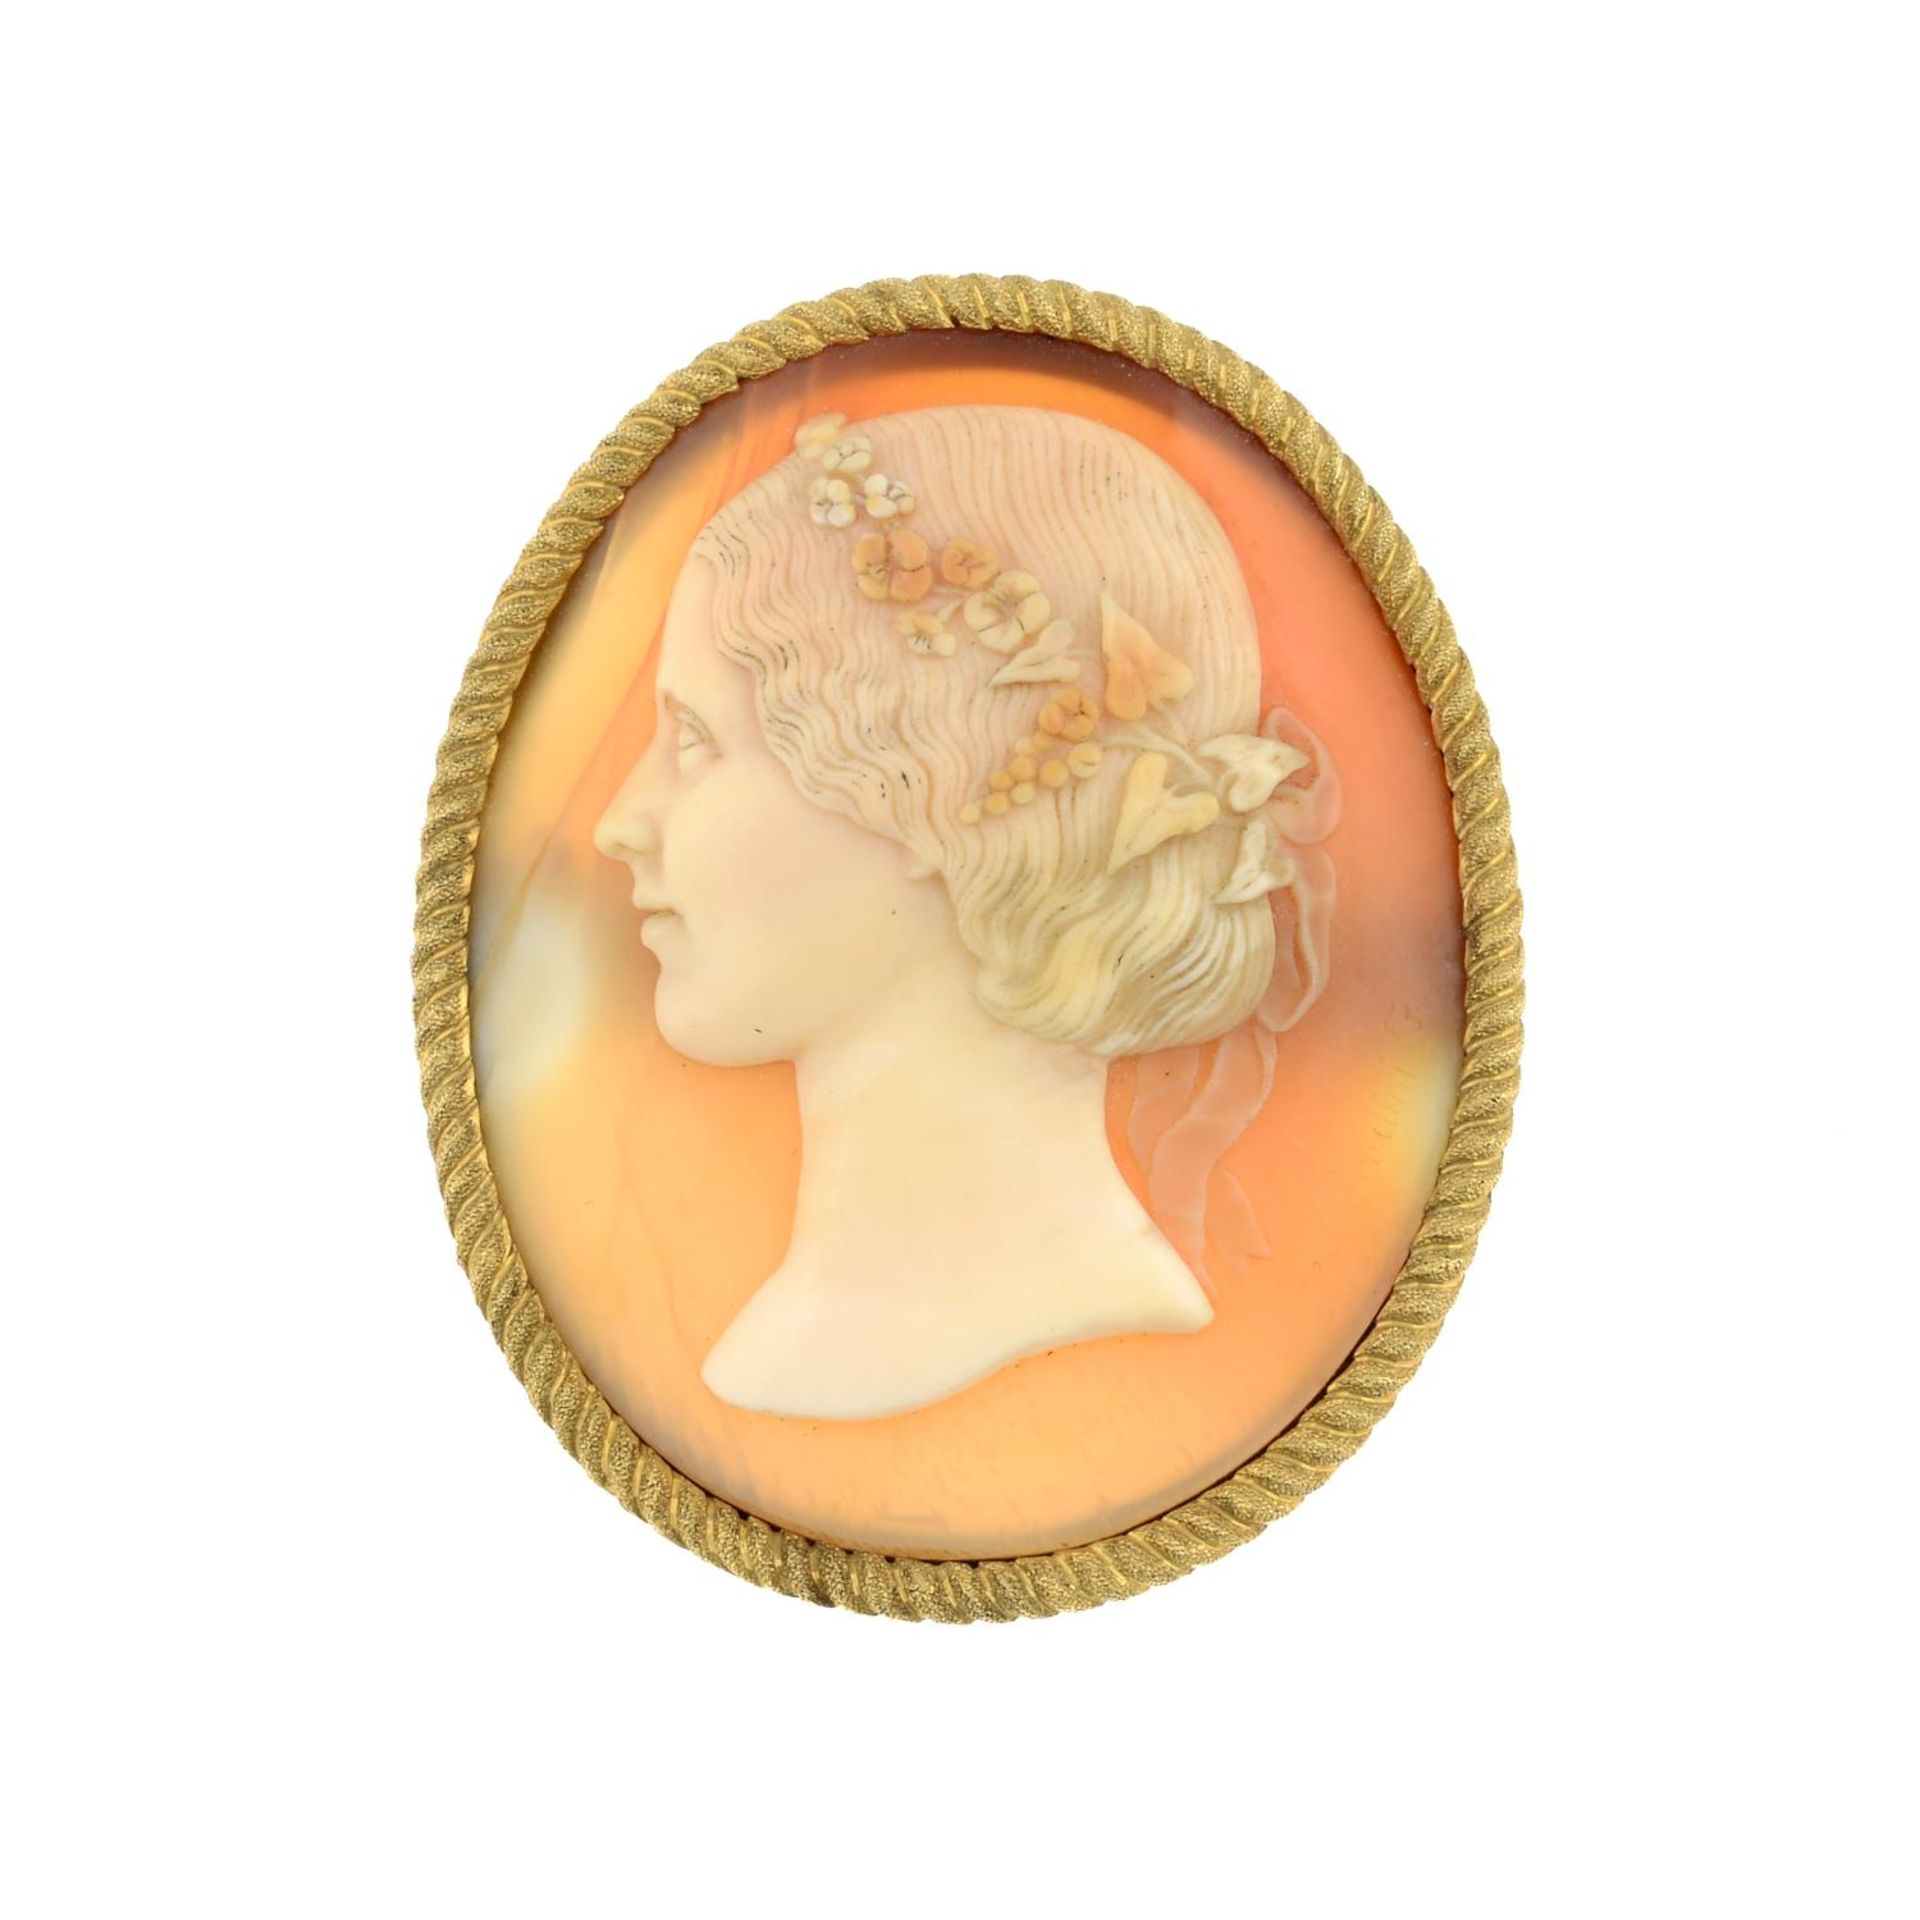 A mounted cameo brooch.Length 5.5cms.19.6gms.